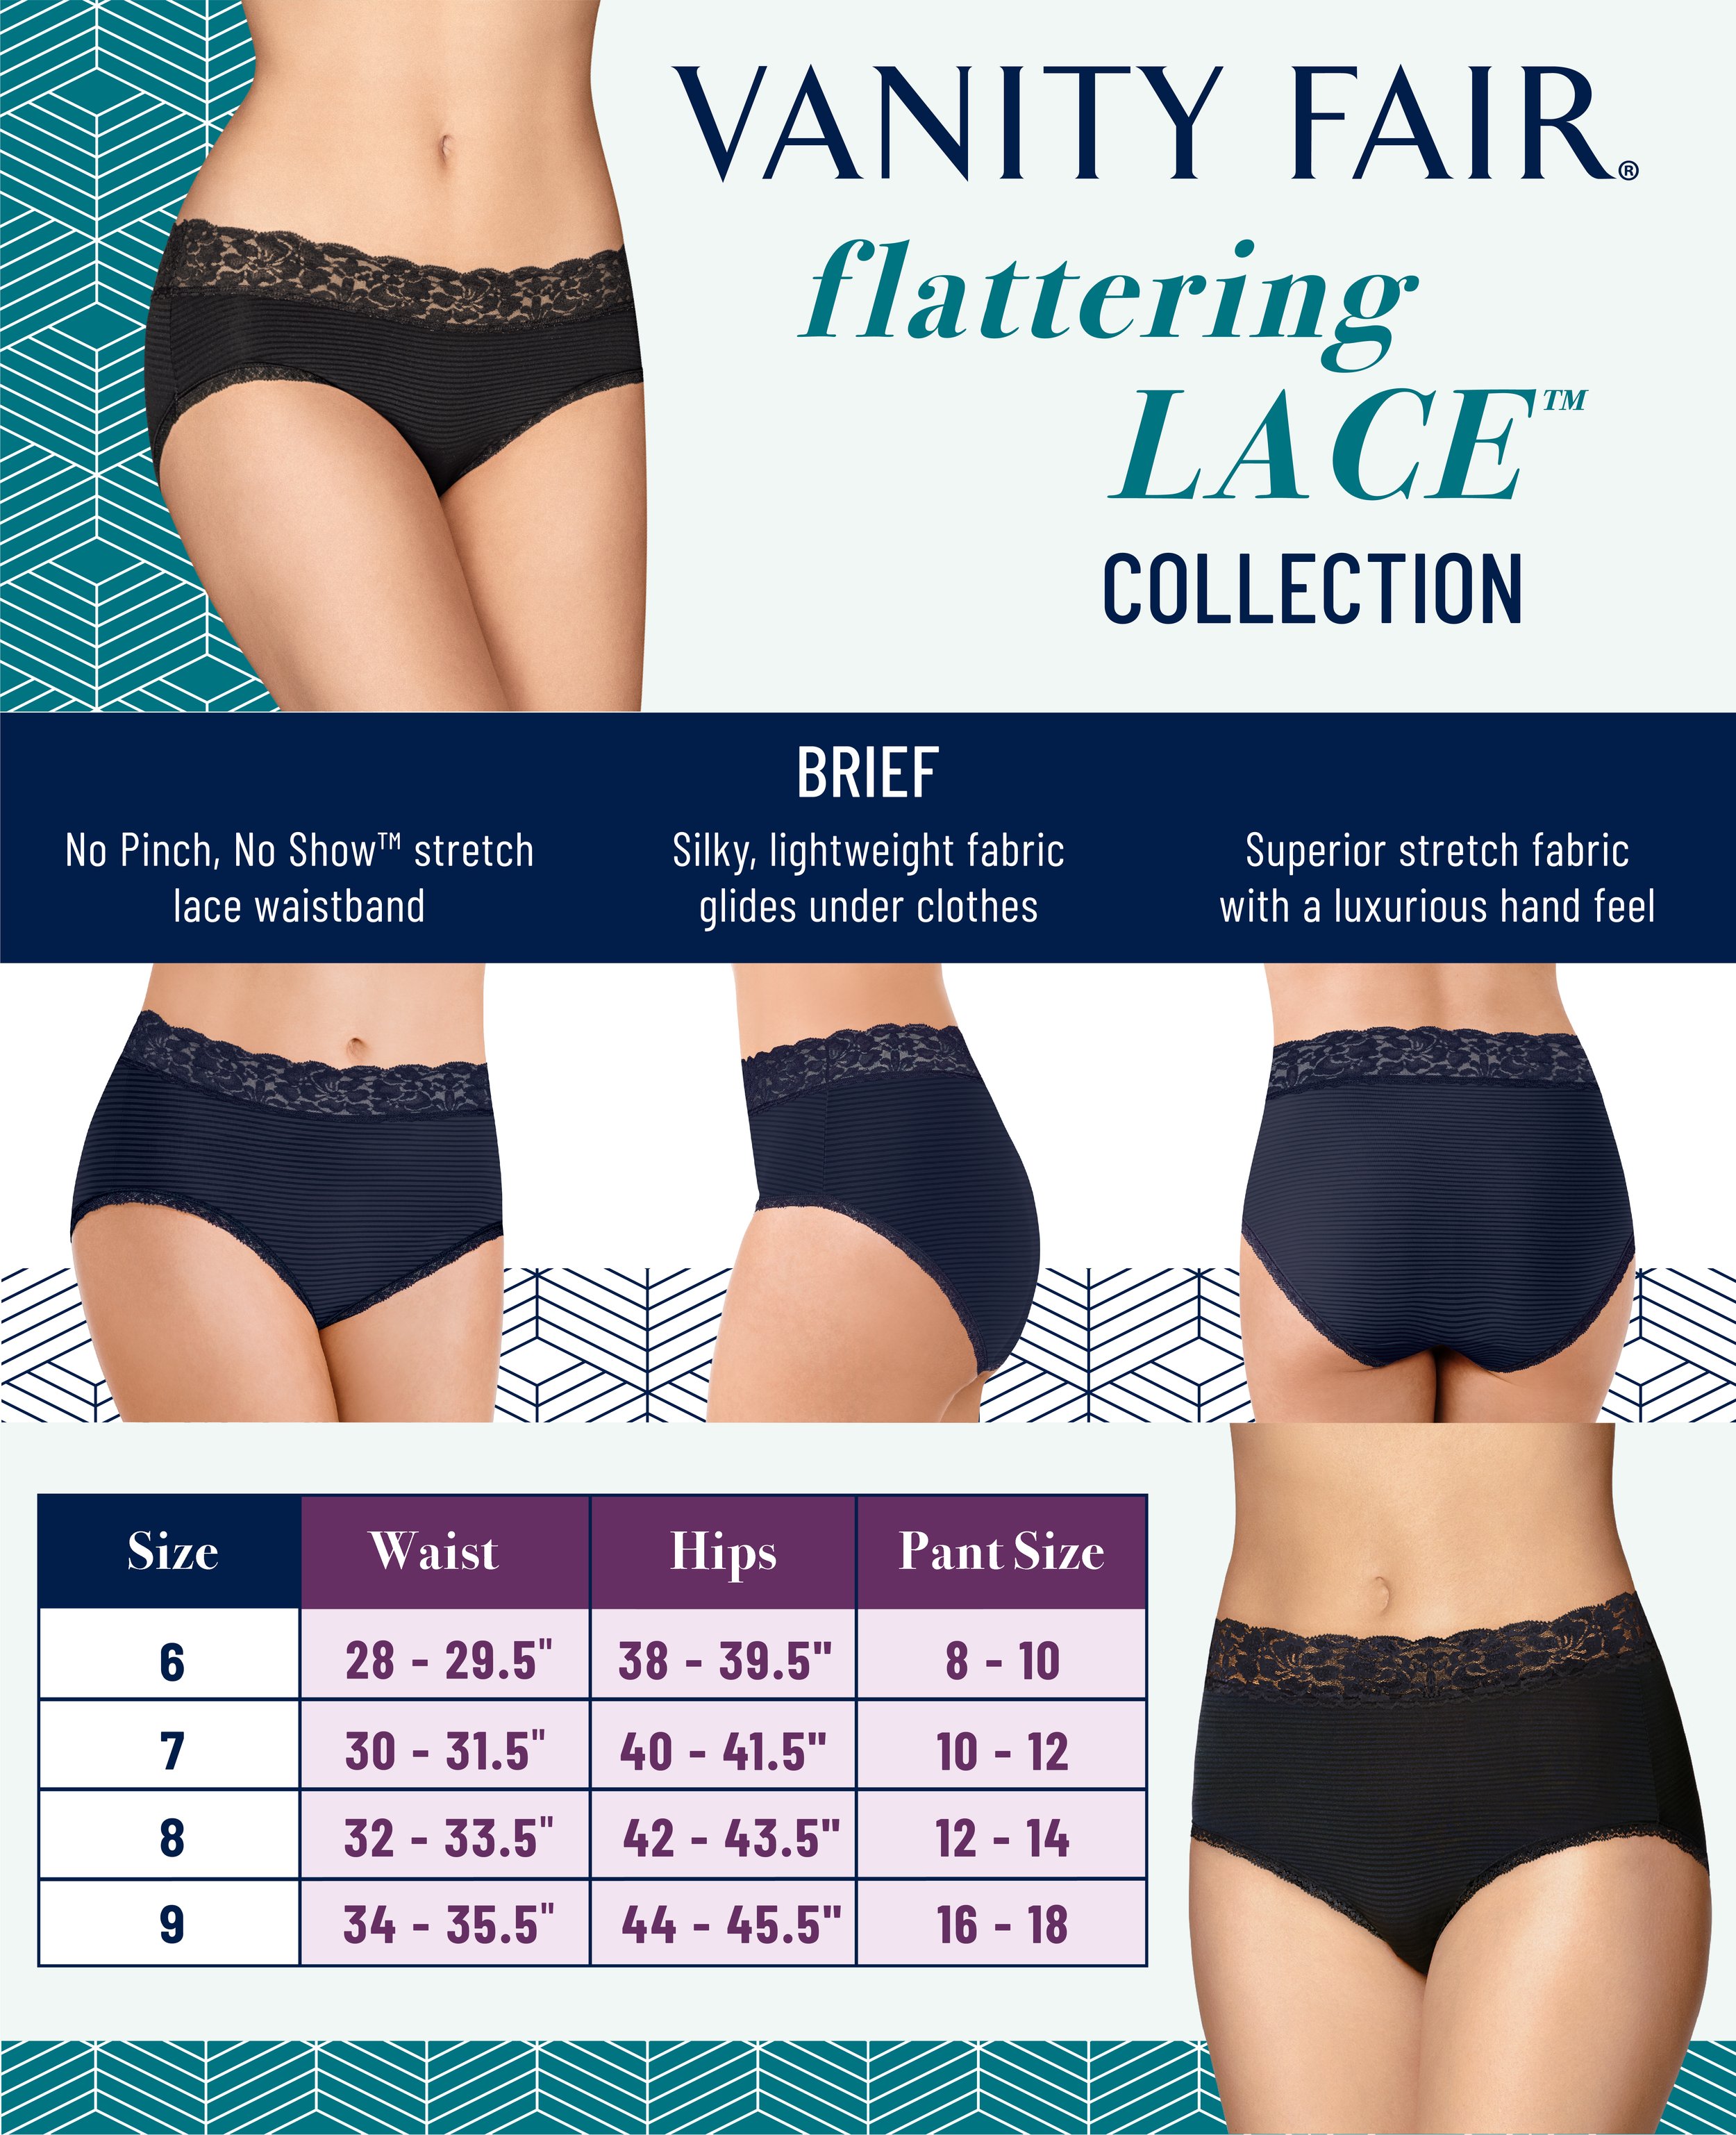 Flattering Lace A++ with Brief 1464x600.jpg